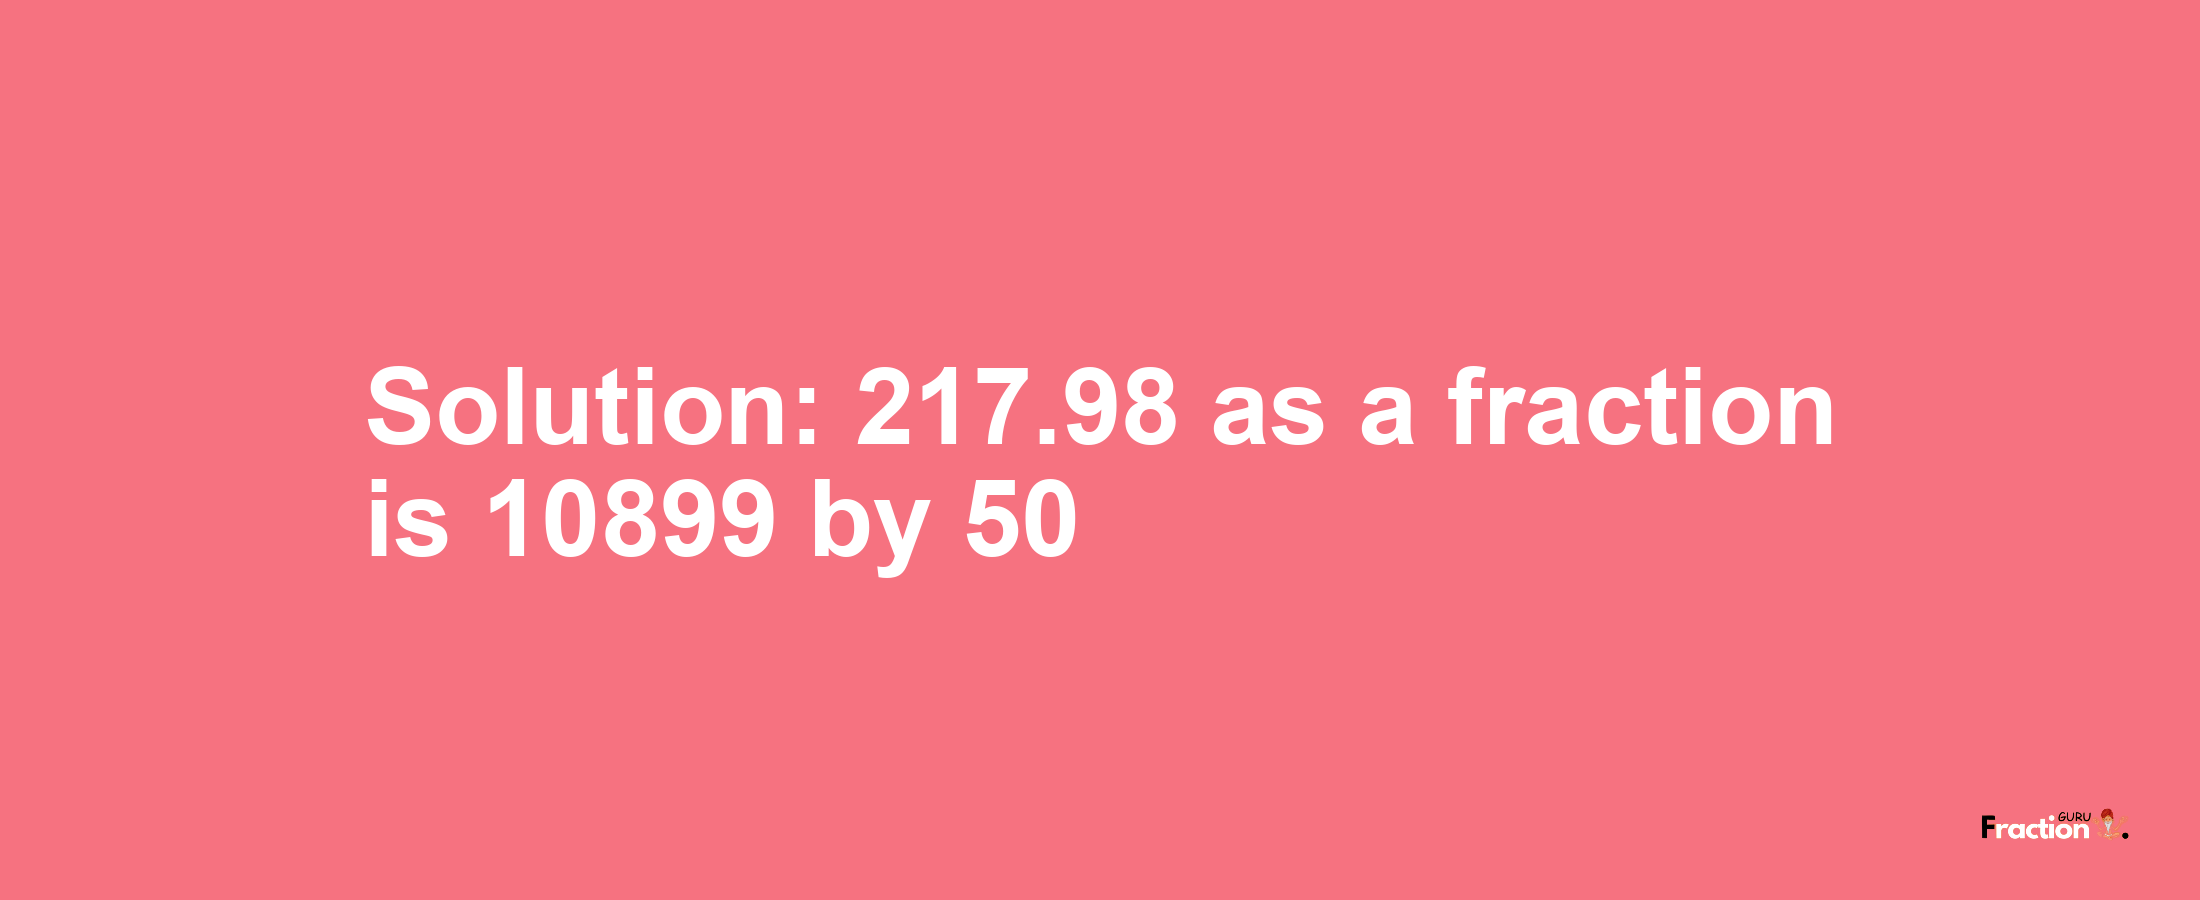 Solution:217.98 as a fraction is 10899/50